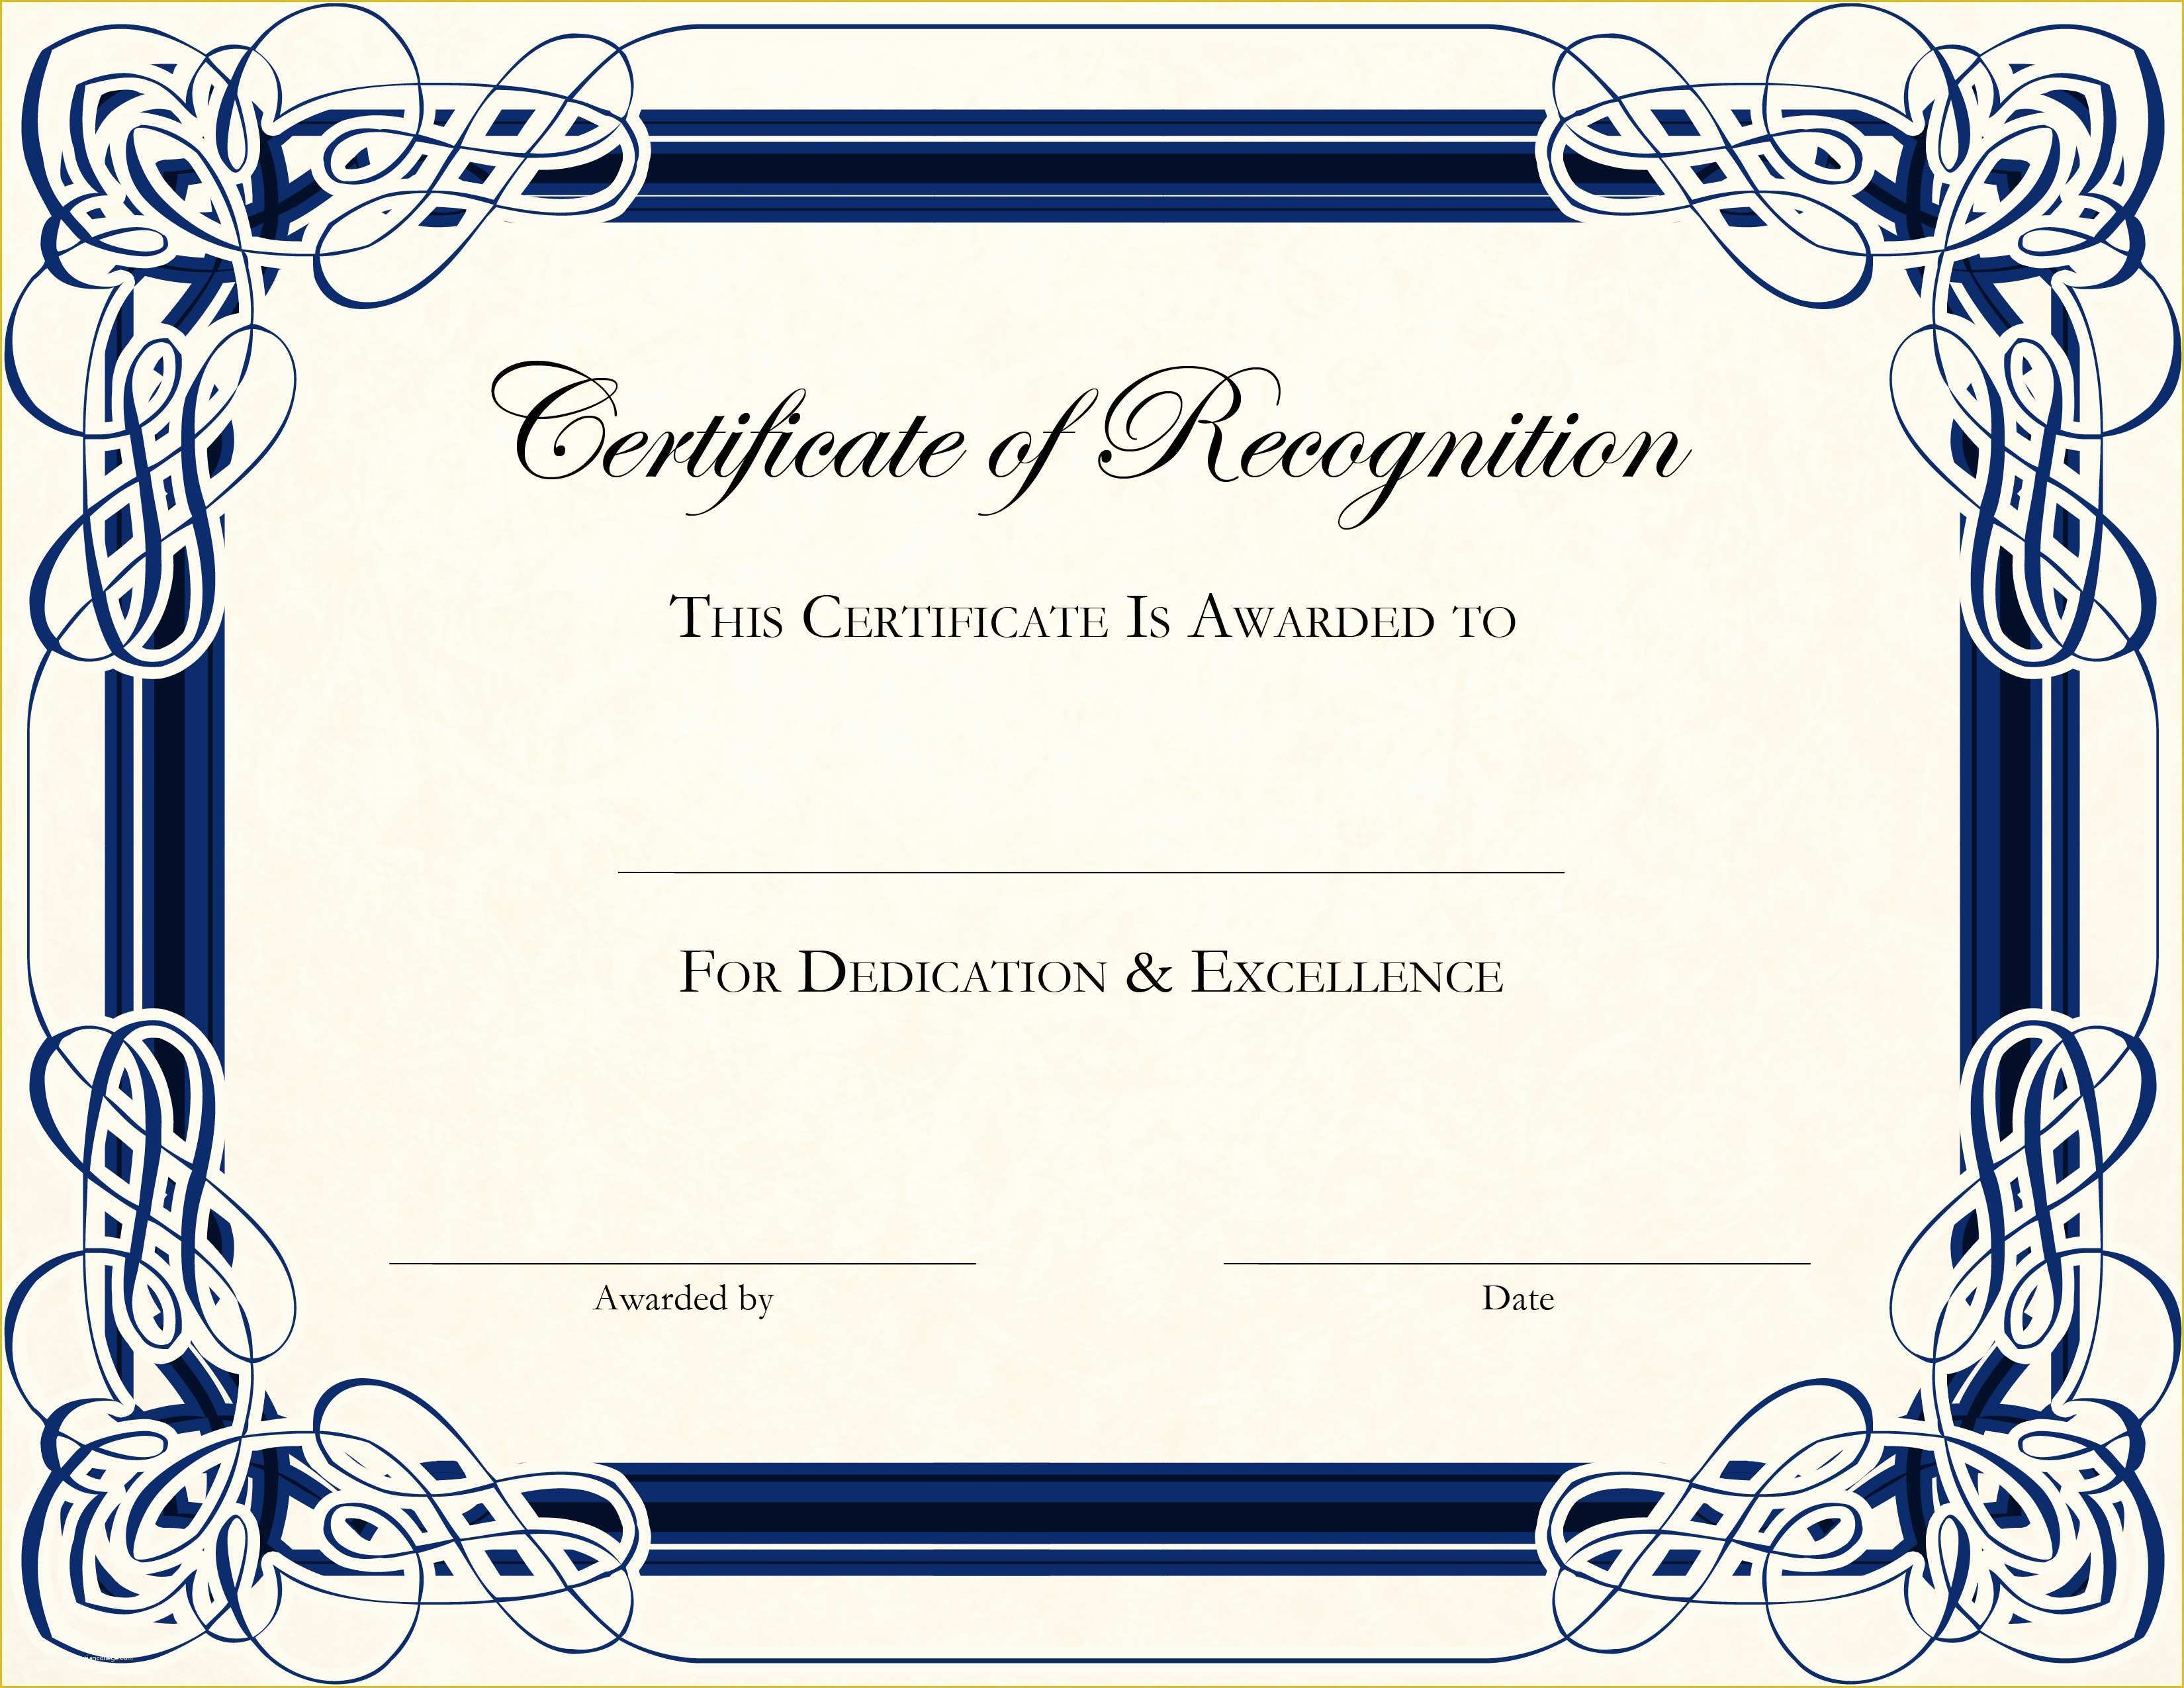 Certificate Of Recognition Template Free Of Templates for Certificates Appreciation